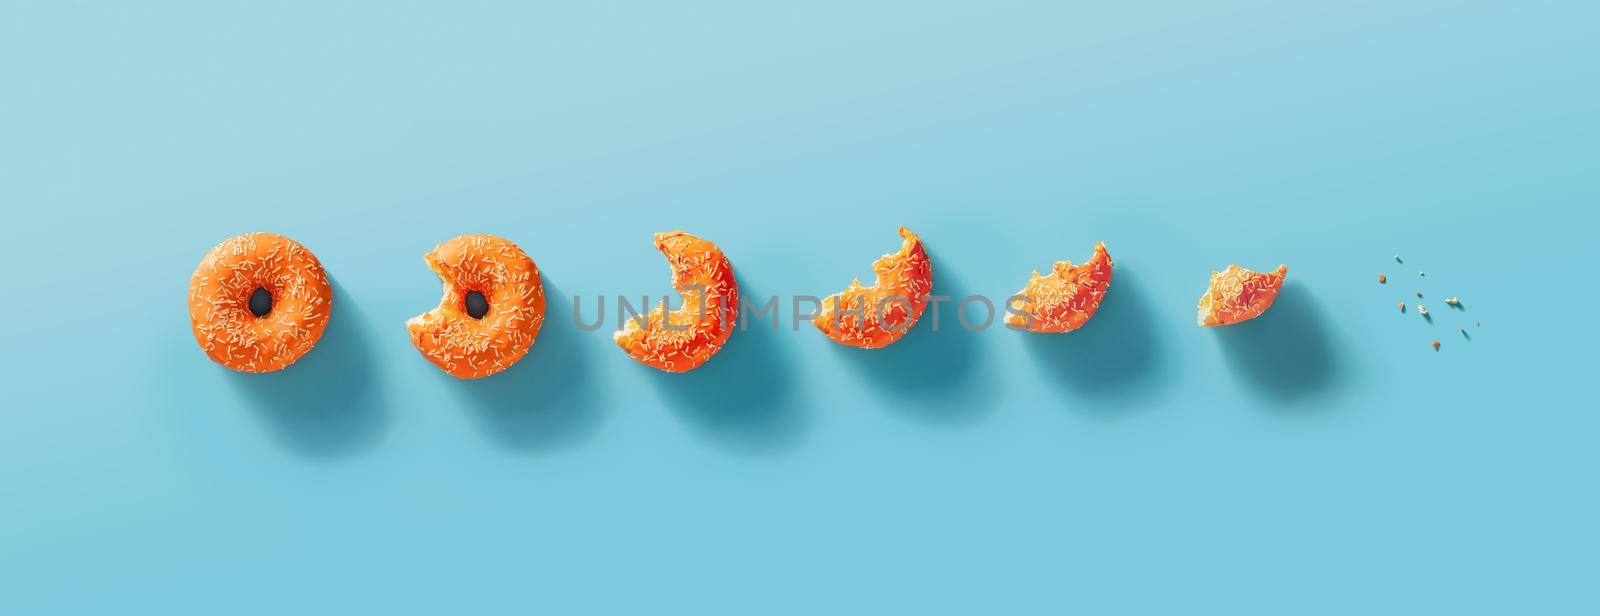 Eaten donut stages, blue background, top view by fascinadora